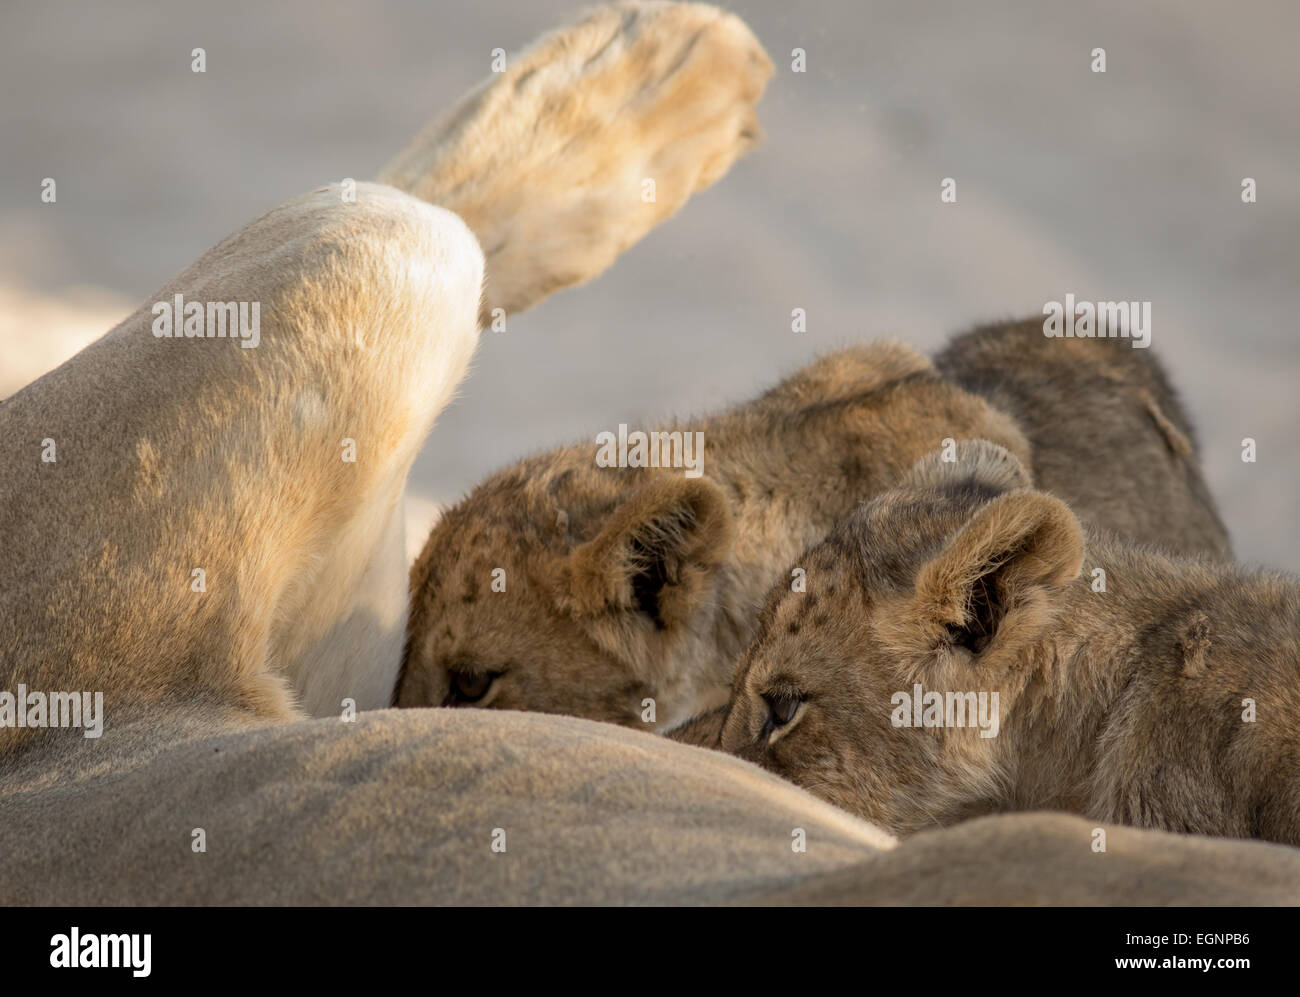 Two lion cubs suckling from their mother Stock Photo